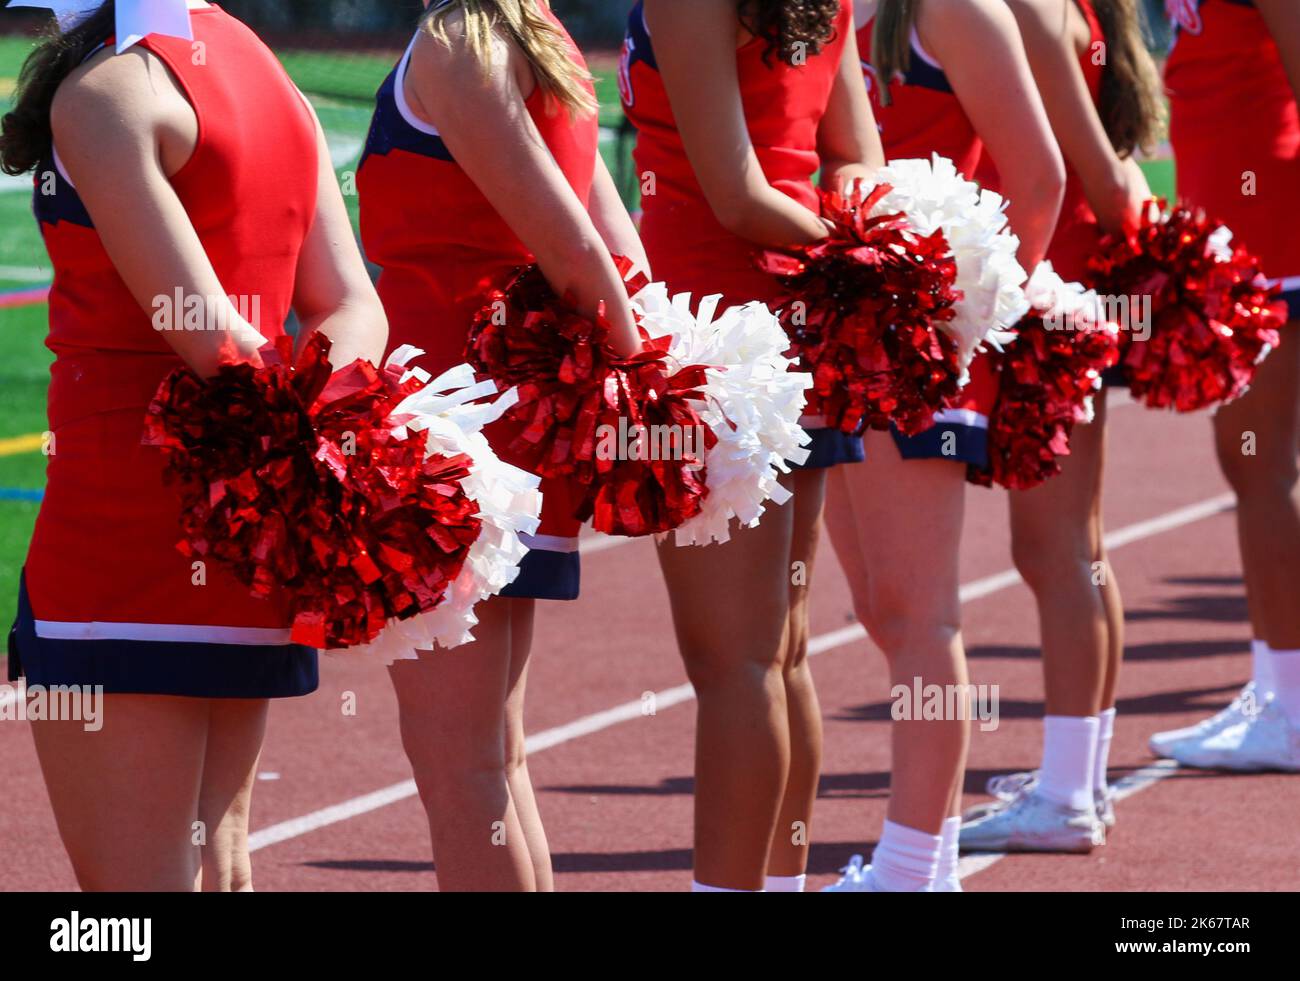 High school cheerleaders in red uniforms standing on the sideline holding their red and white pom poms behind them during a football game. Stock Photo